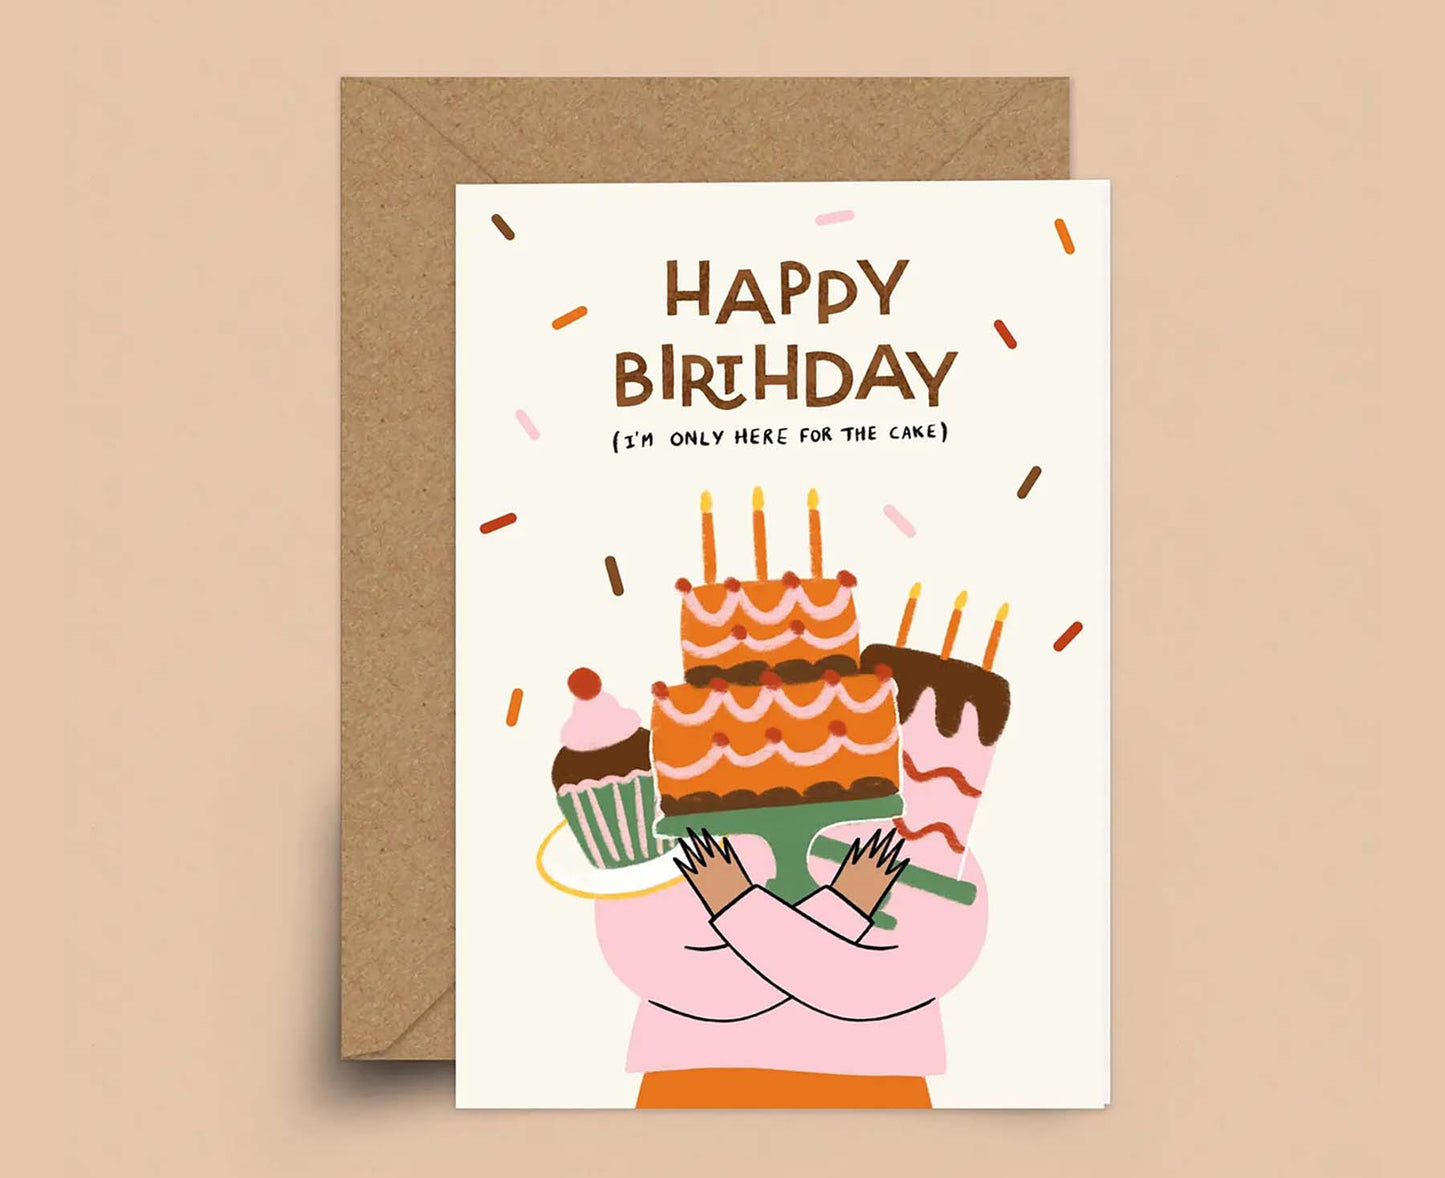 I'm Only Here For The Cake birthday card